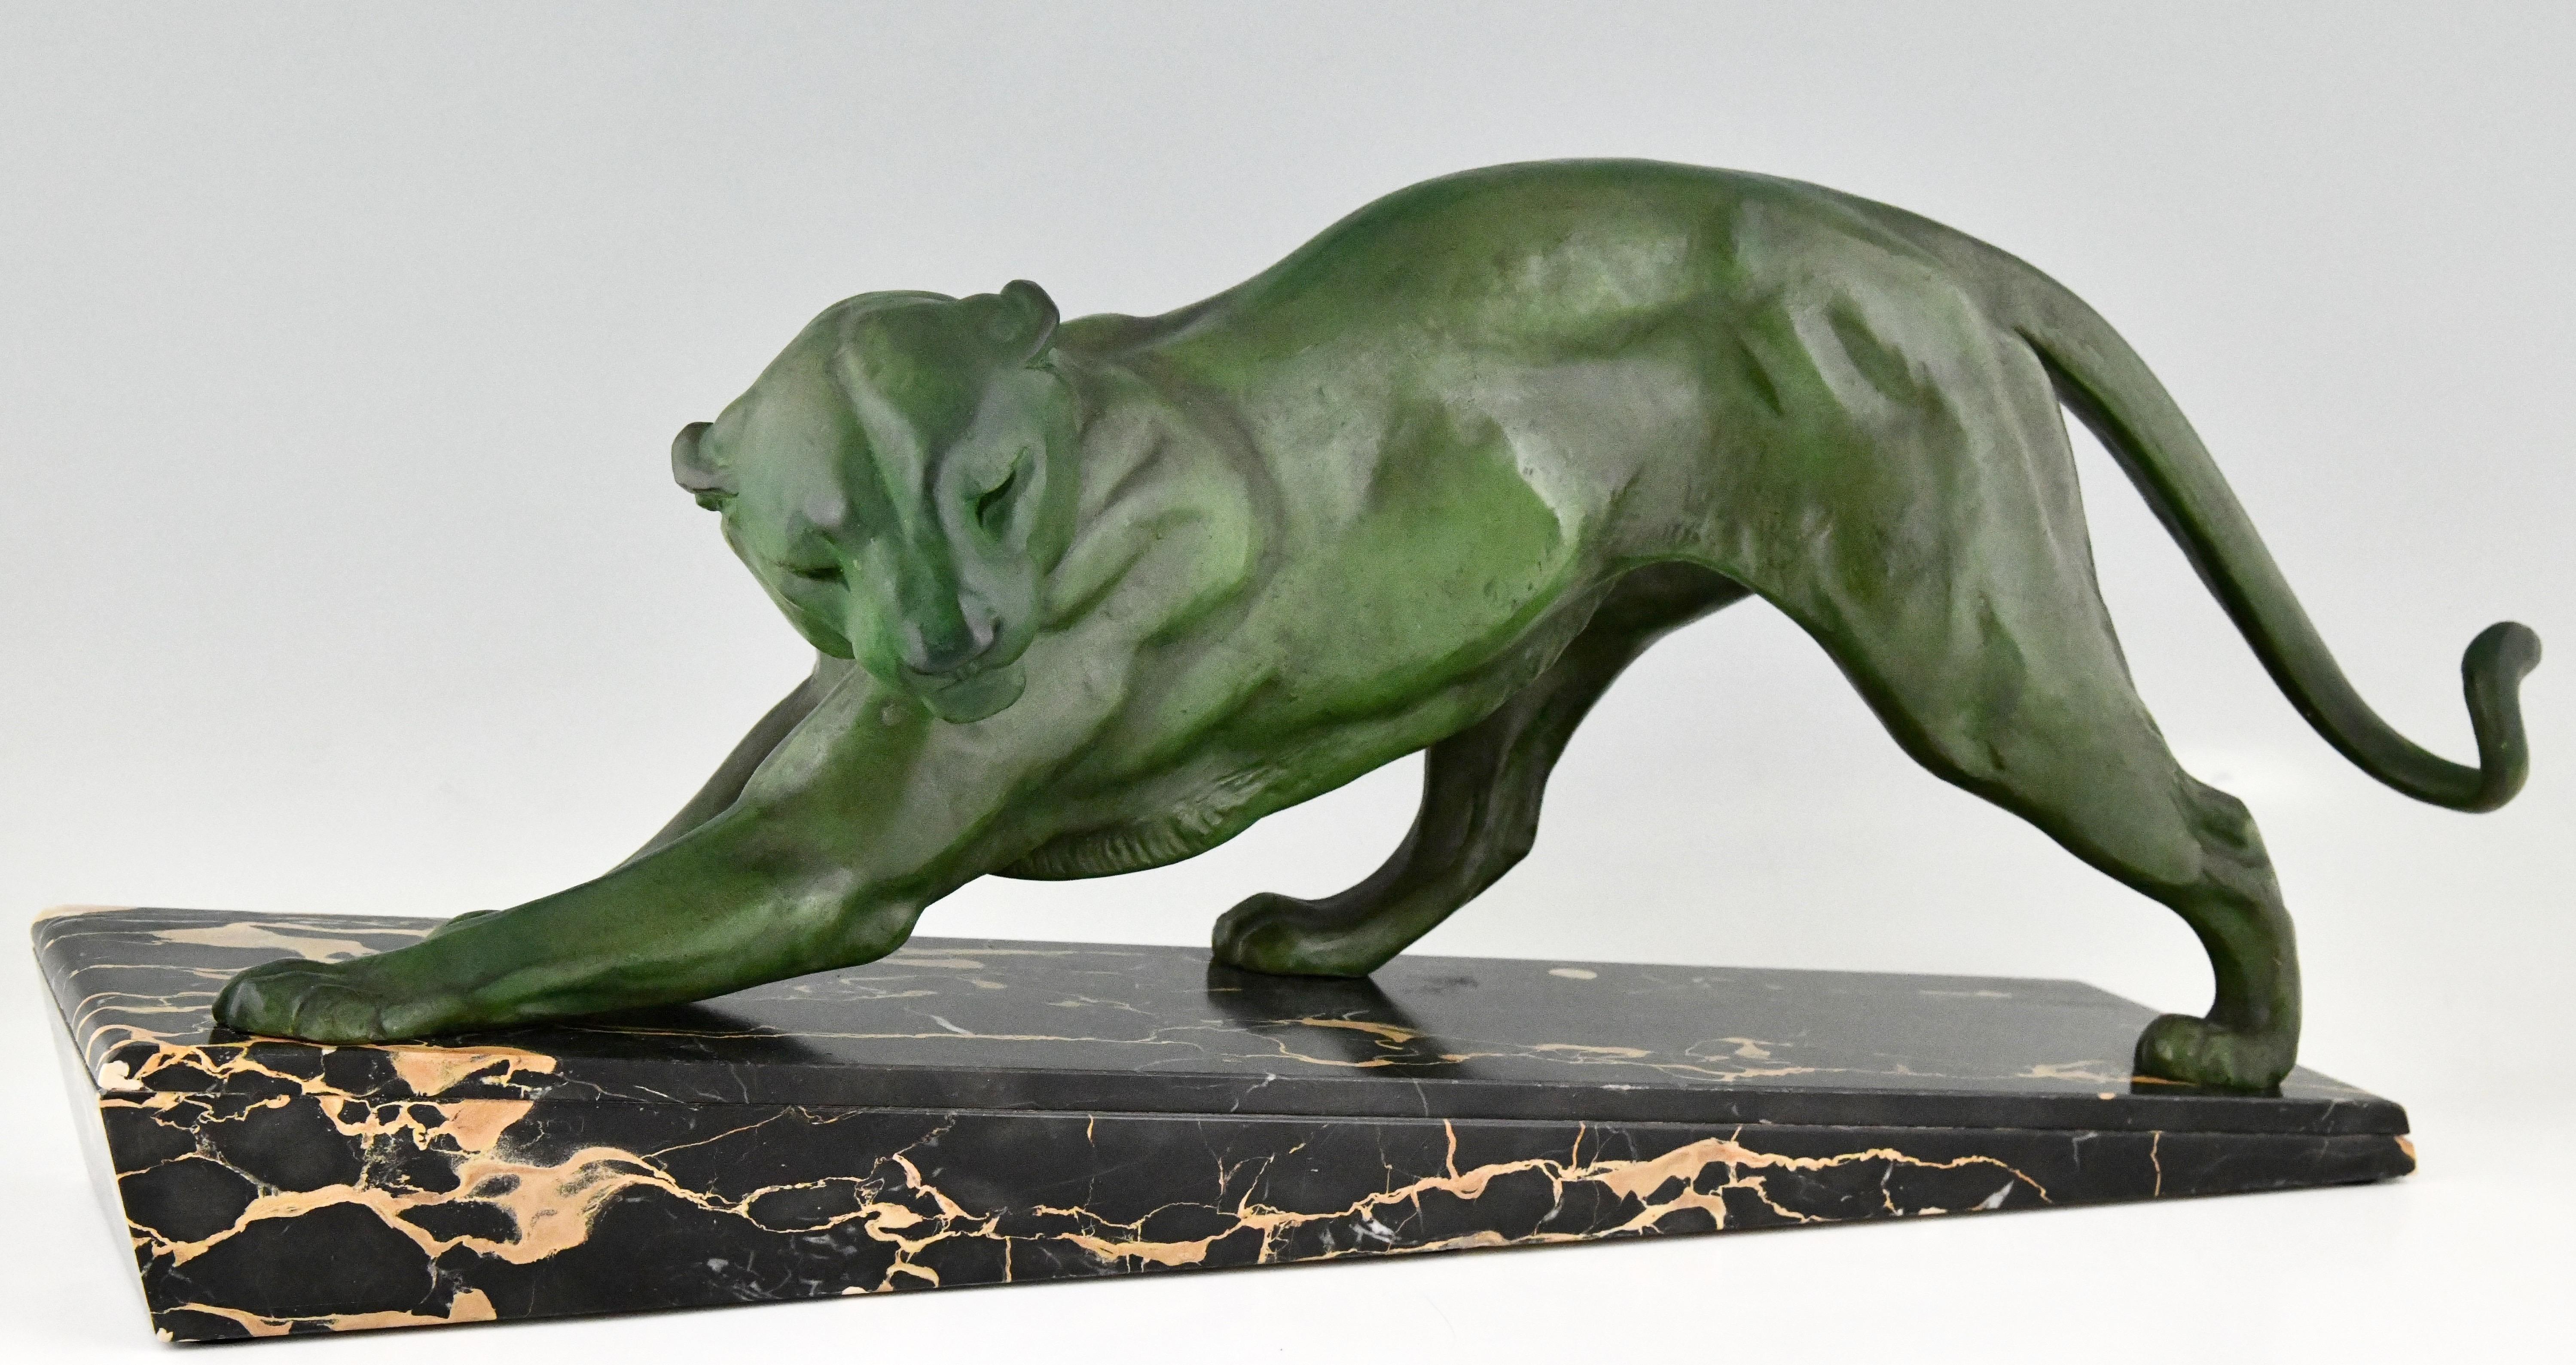 French Art Deco Sculpture of a Panther by Plagnet, France, 1930